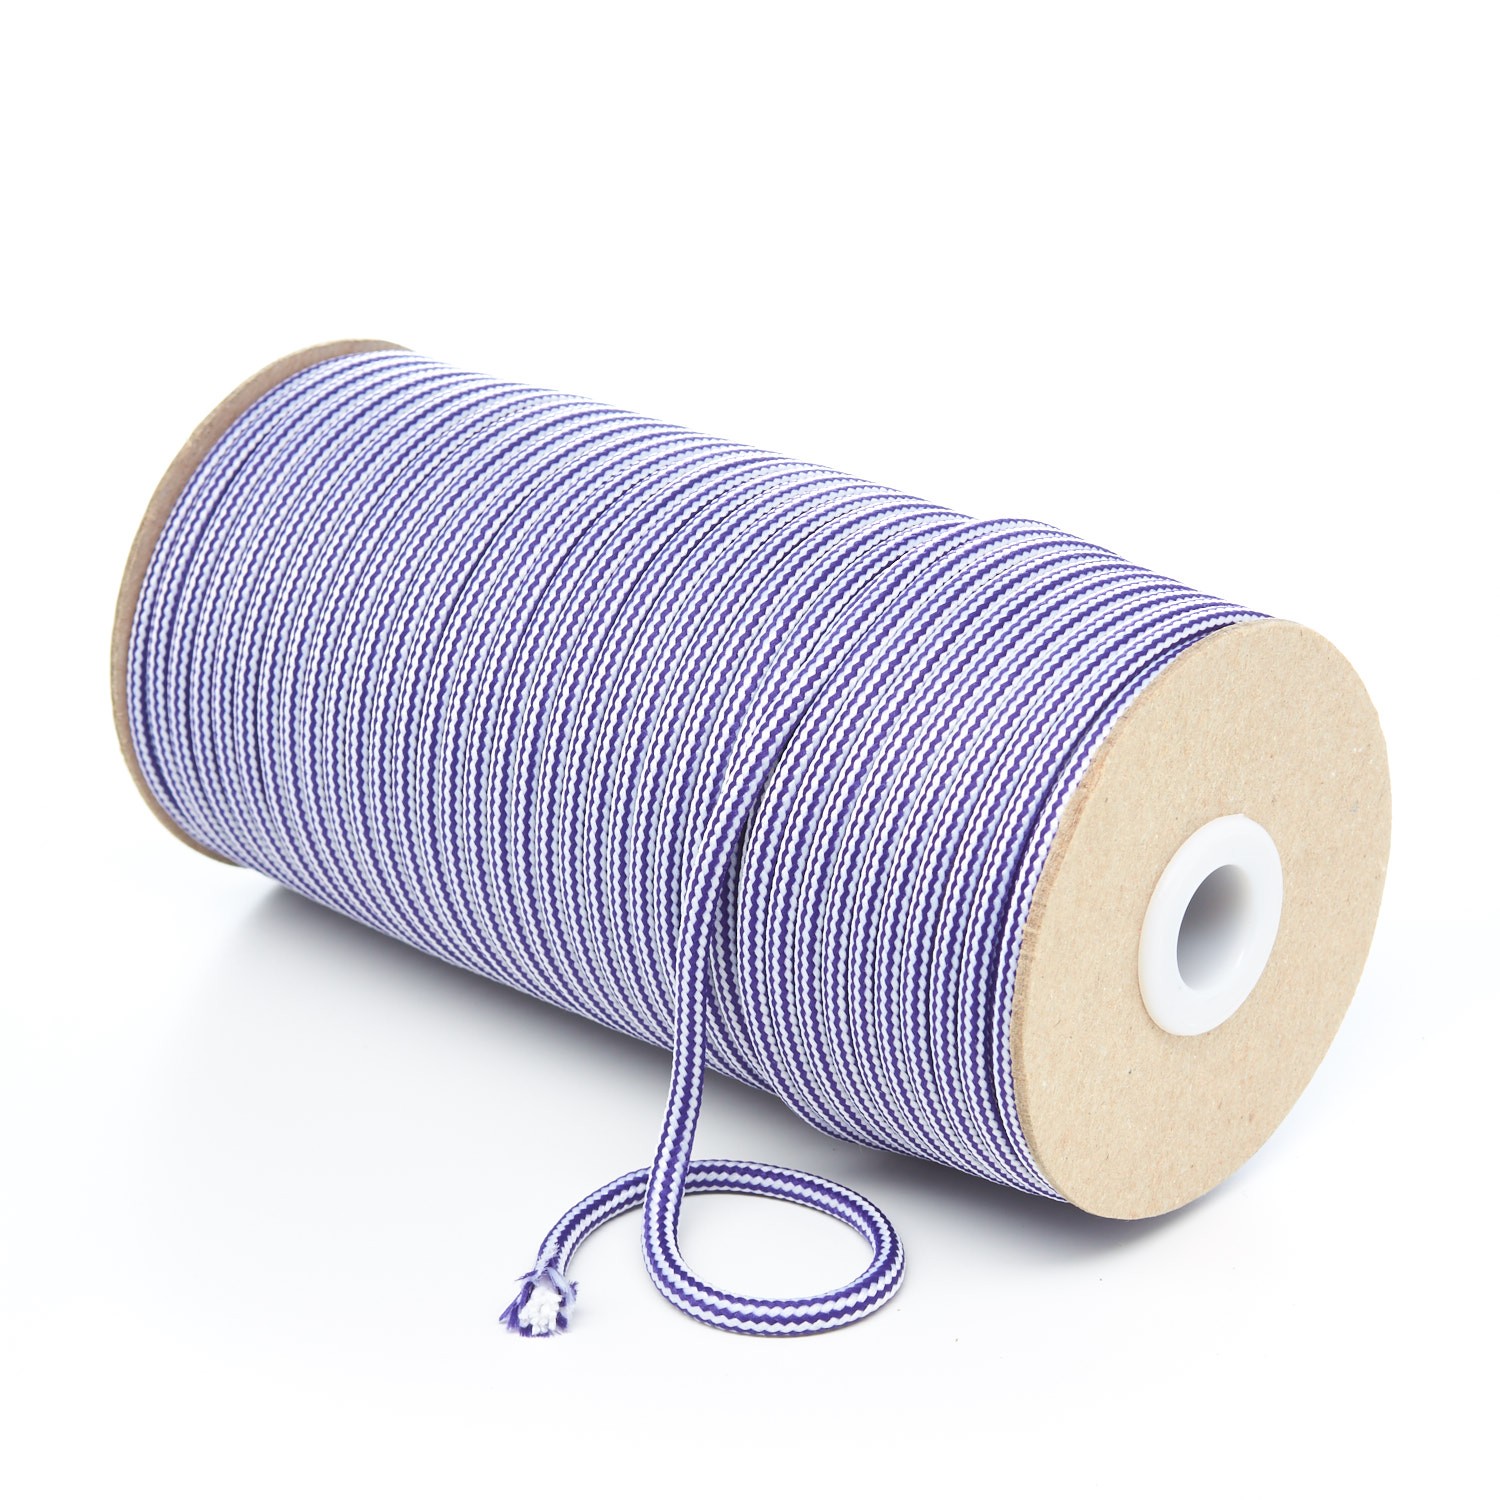 T621 Round Cord Stripes Purple and White Kalsi Cords